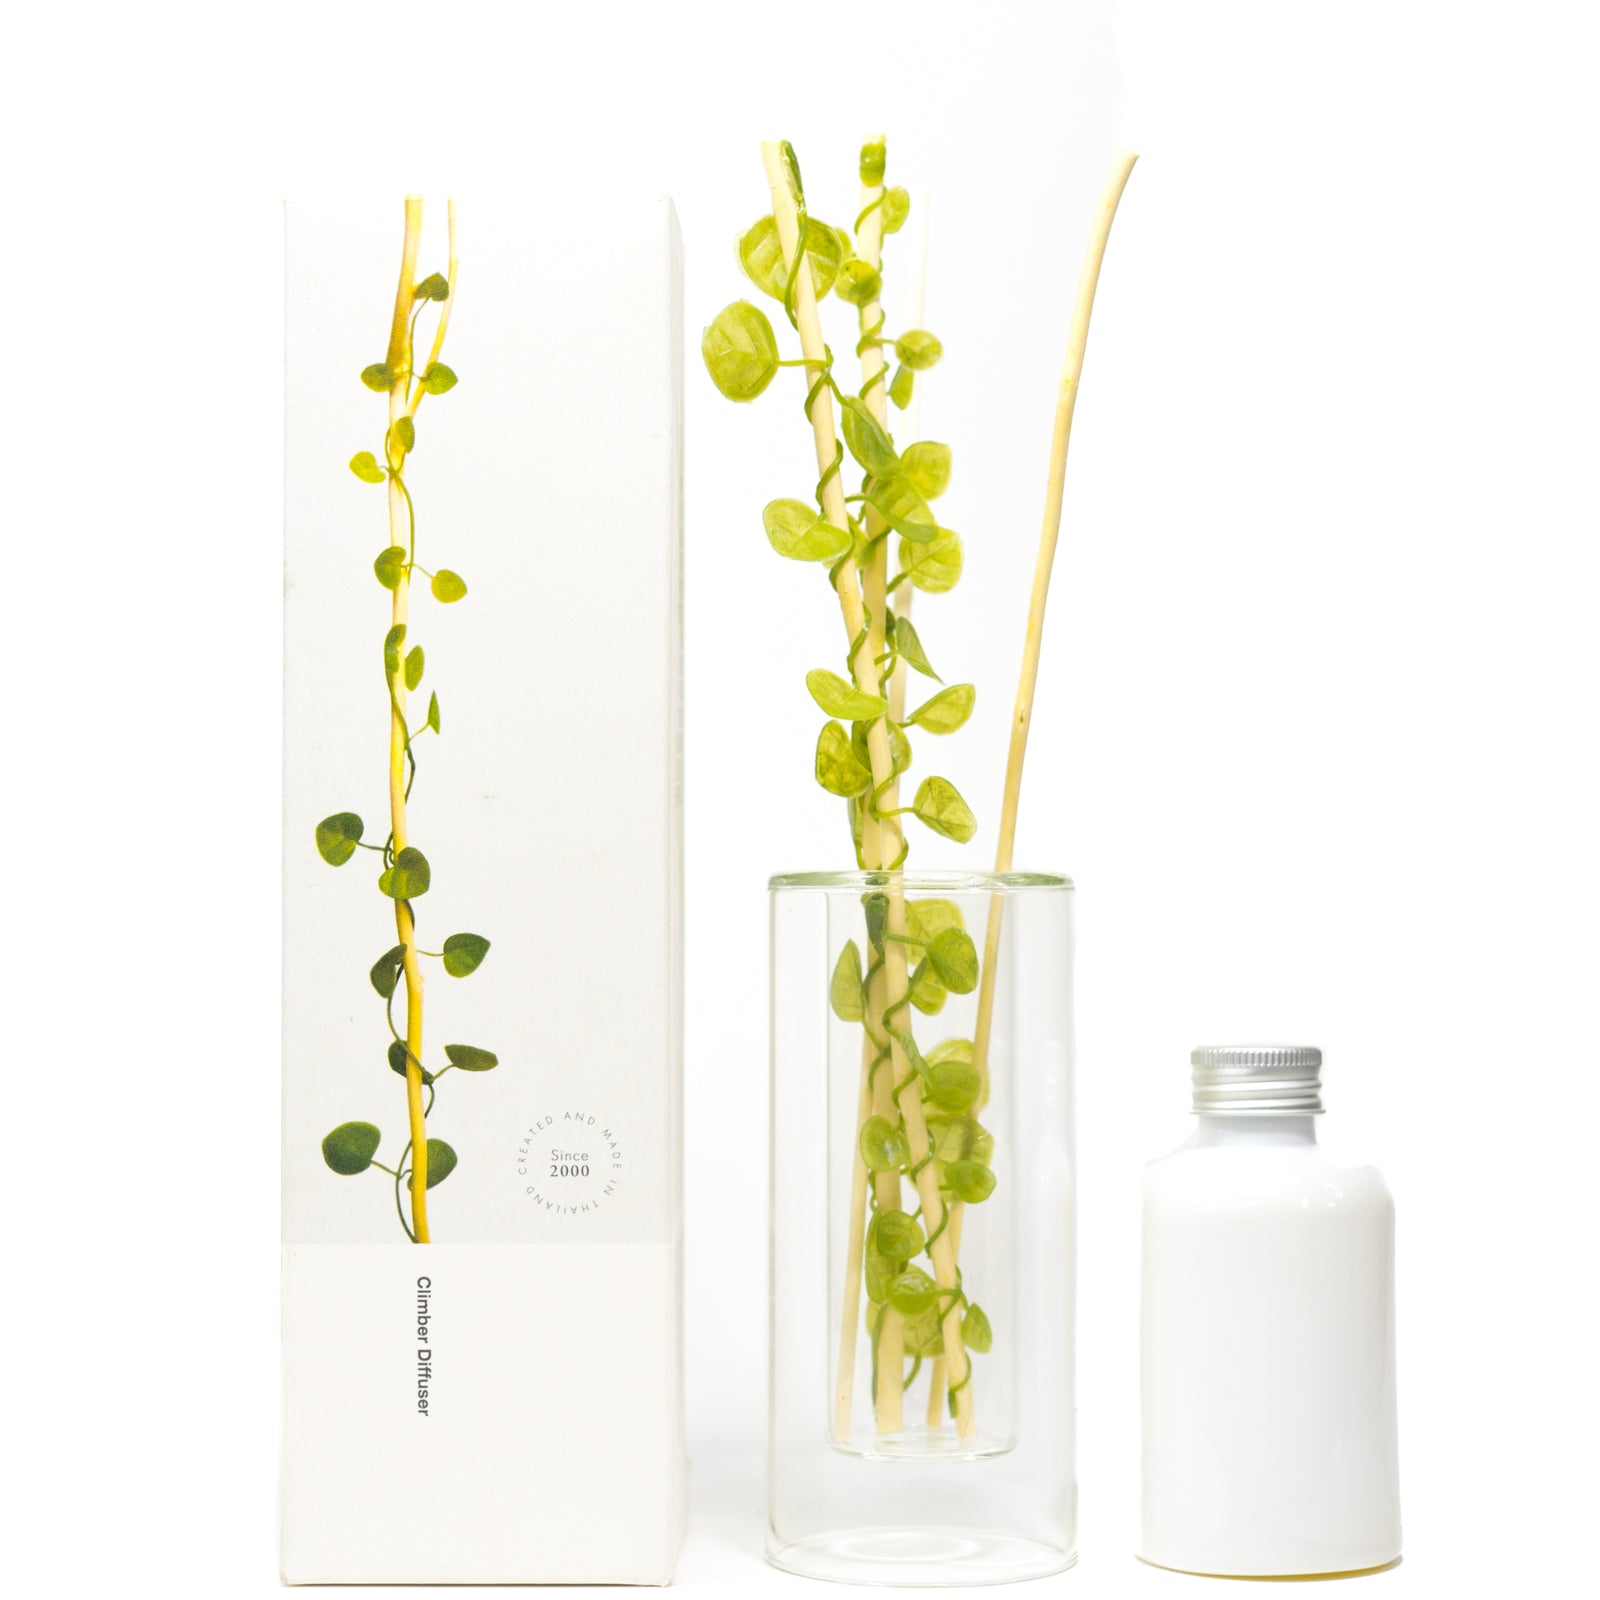 Well designed Aroma Diffuser Set has refreshing aromatic scent with reed leaves